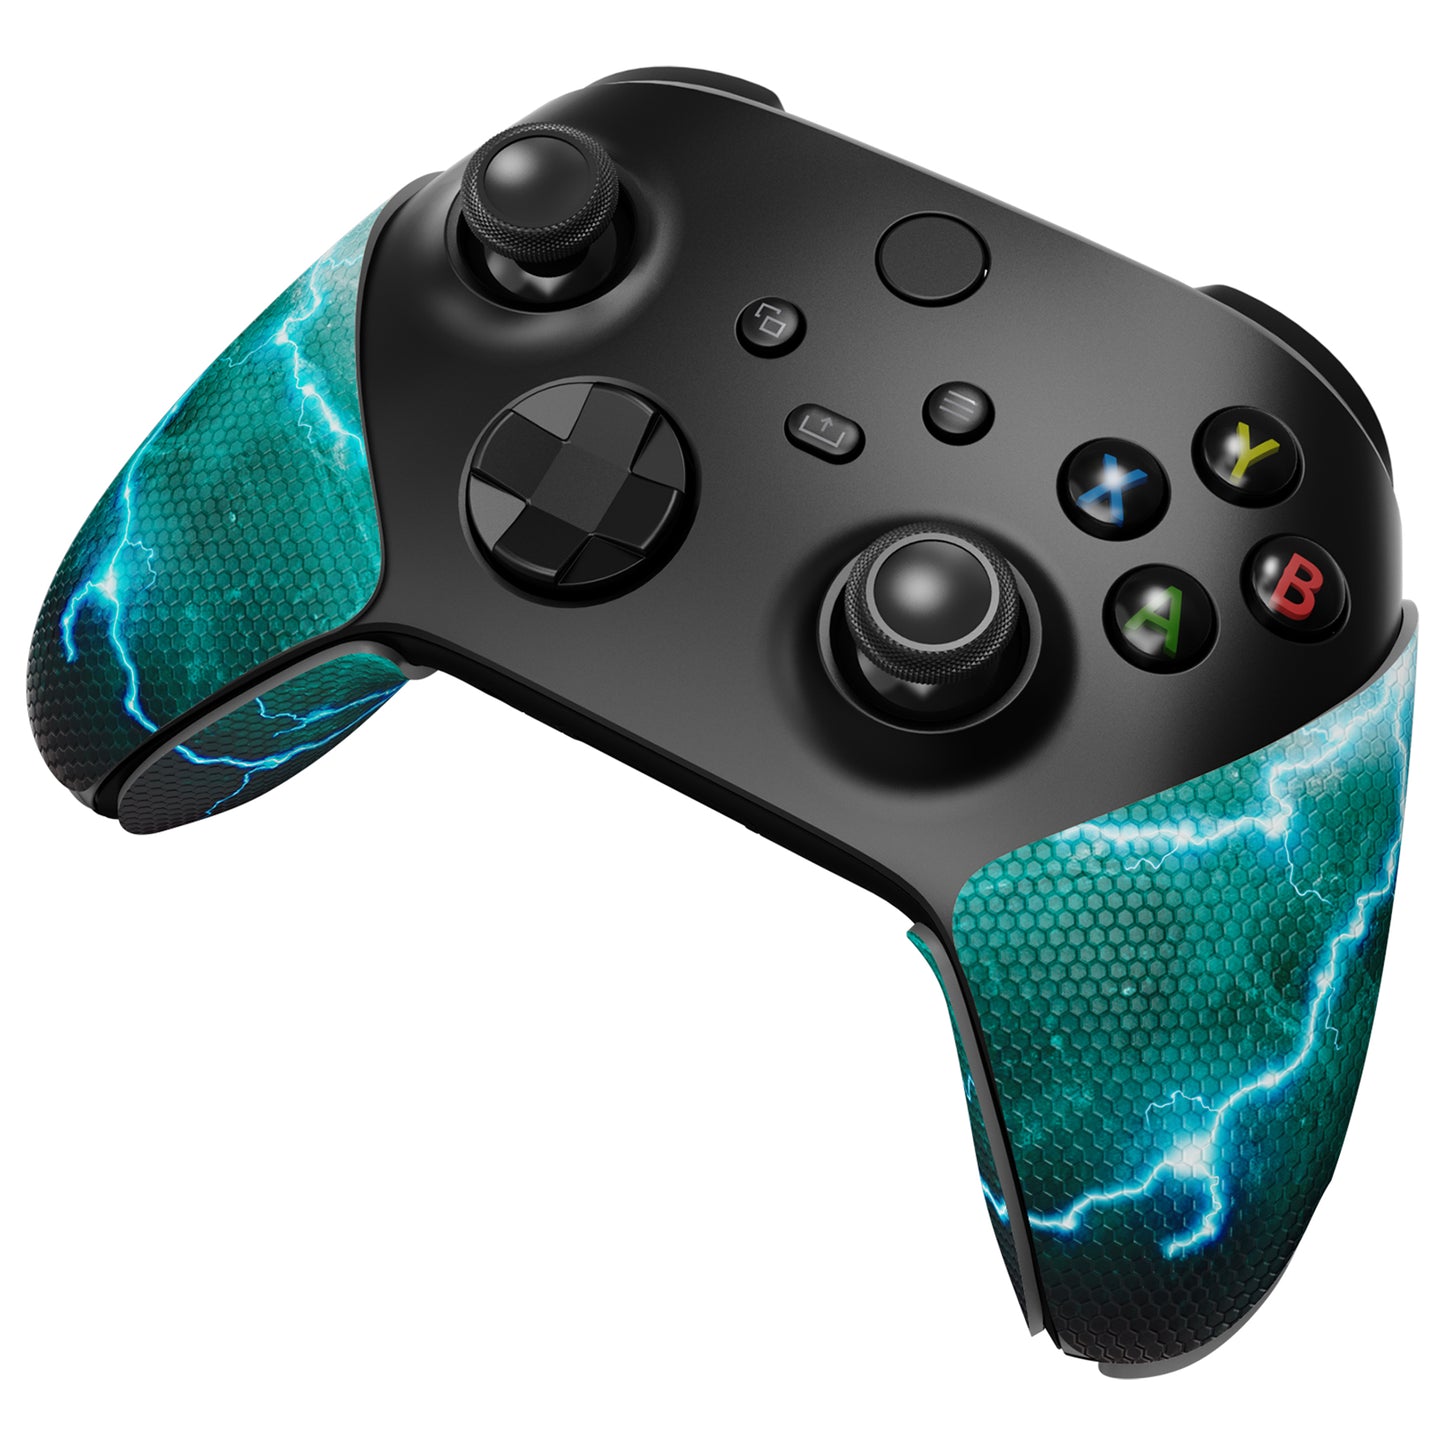 PlayVital Green Storm Thunder Anti-Skid Sweat-Absorbent Controller Grip for Xbox Series X/S Controller, Professional Textured Soft Rubber Pads Handle Grips for Xbox Series X/S Controller - X3PJ047 PlayVital